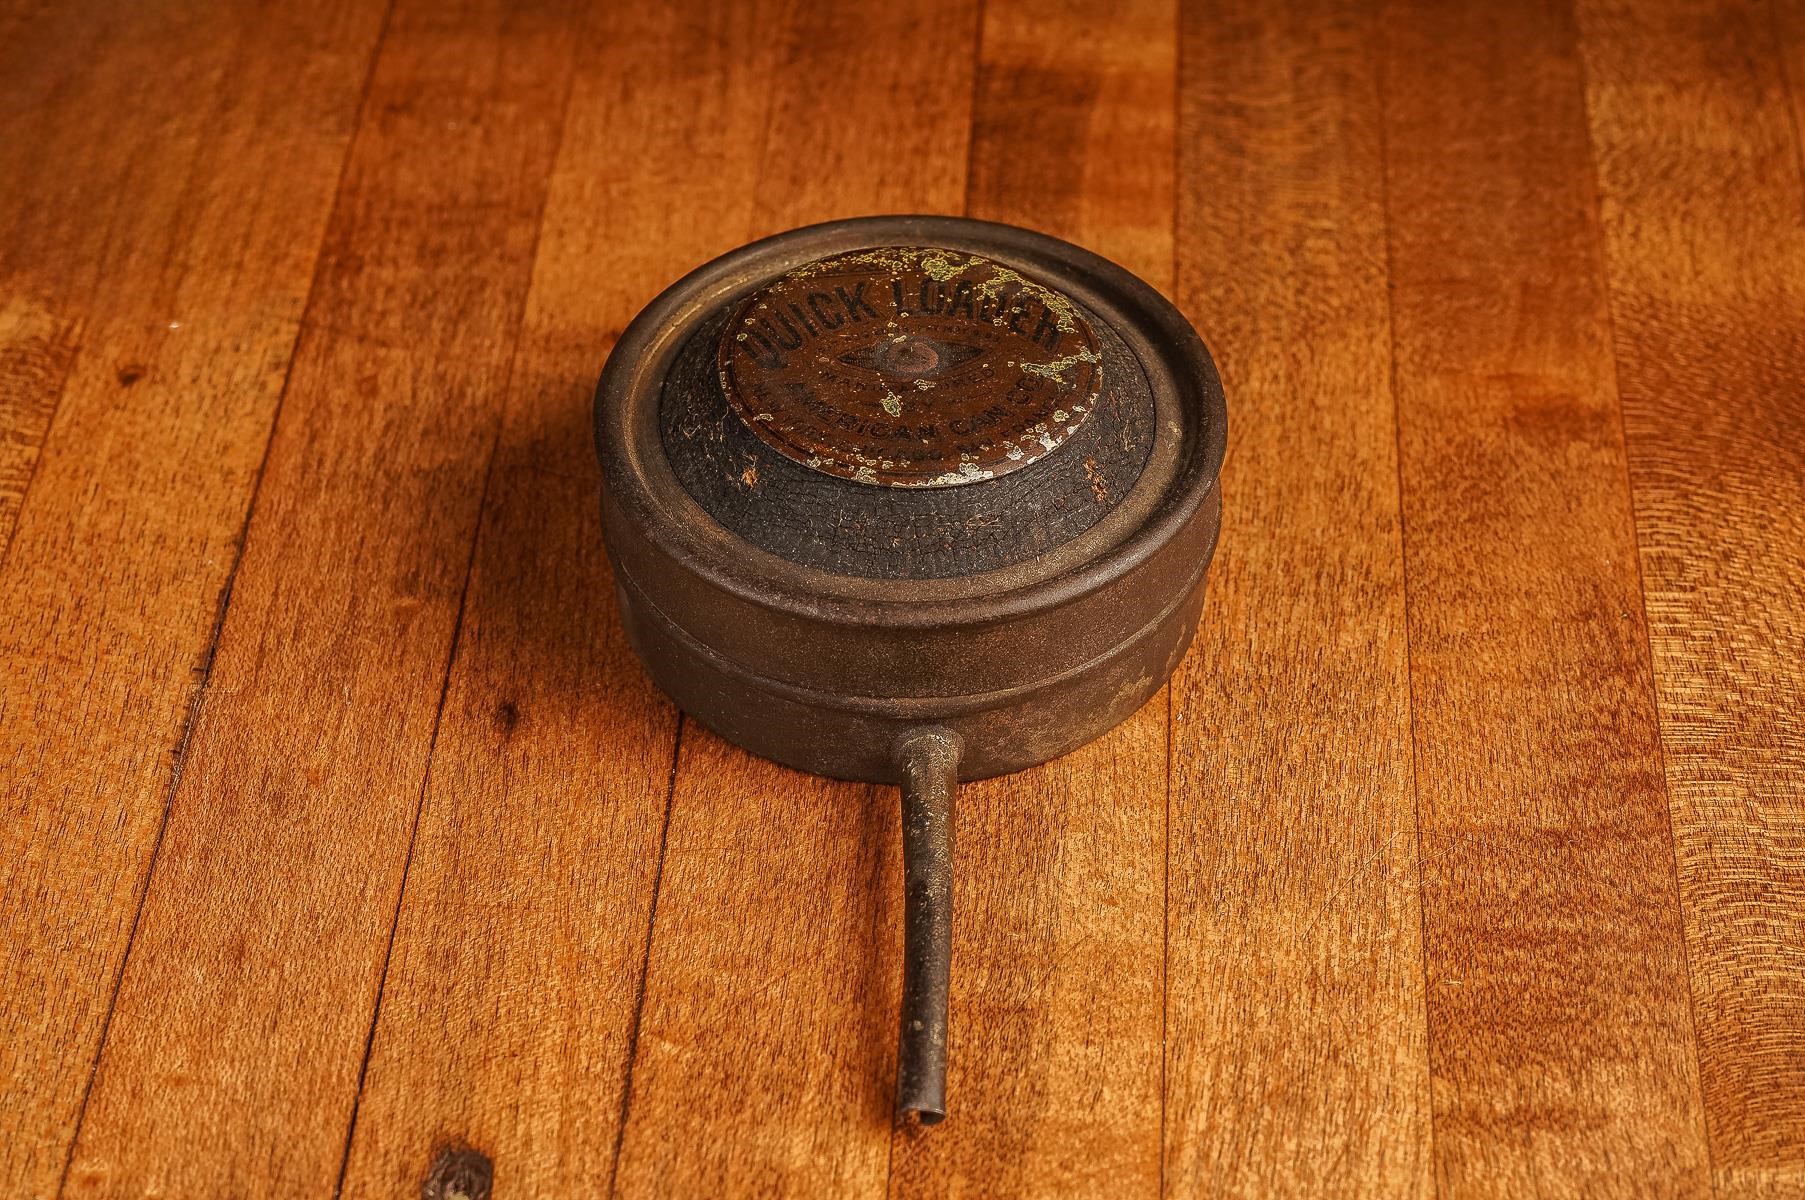 Late 19th Century American Can Co. Quick Loader